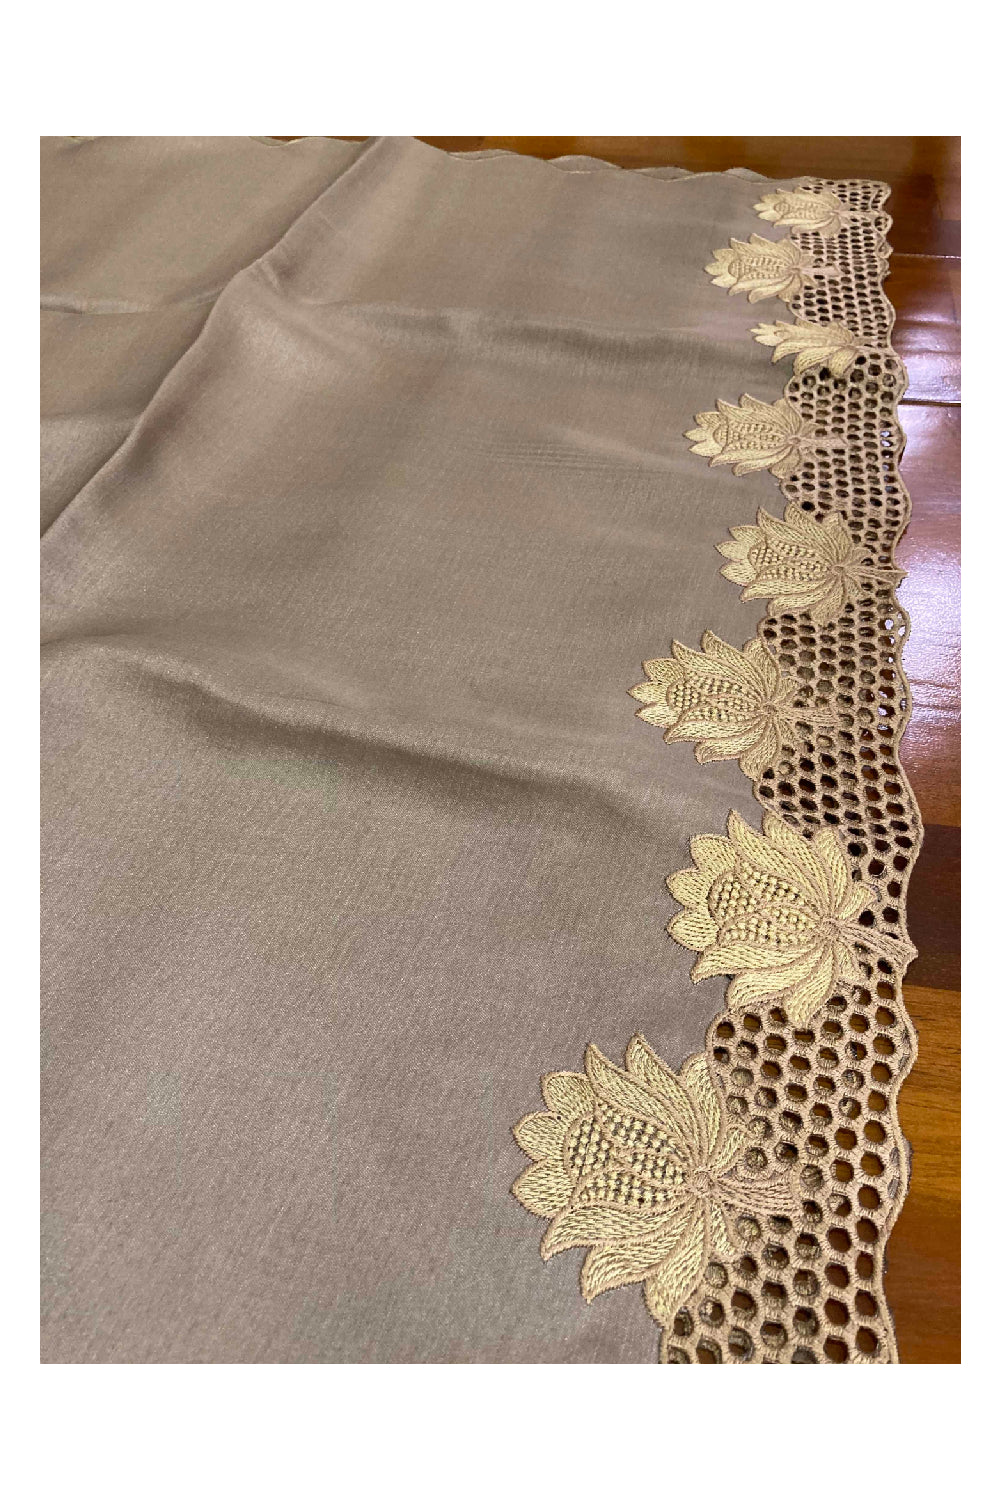 Southloom™ Semi Tussar Churidar Salwar Suit Material in Grey with Embroidery Work